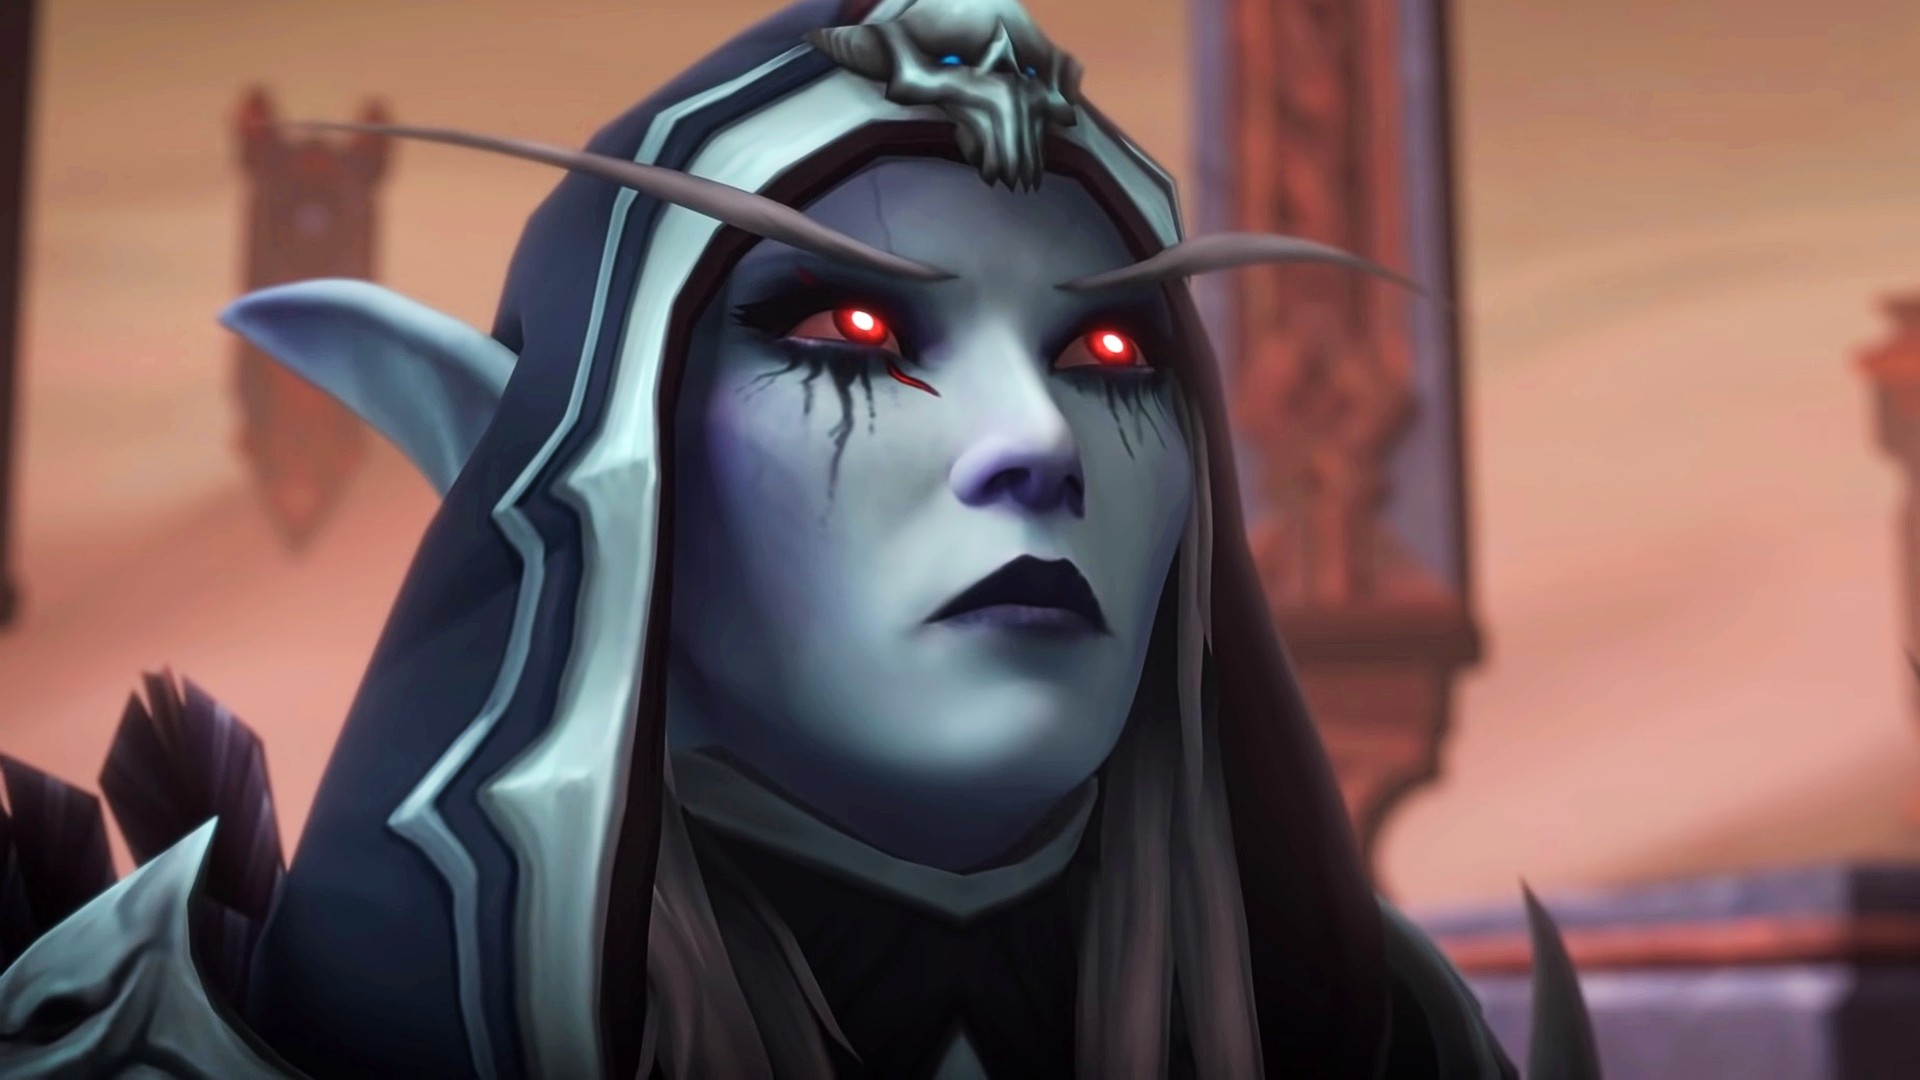 WoW’s Heroic Sylvanas fight is giving players a rough time